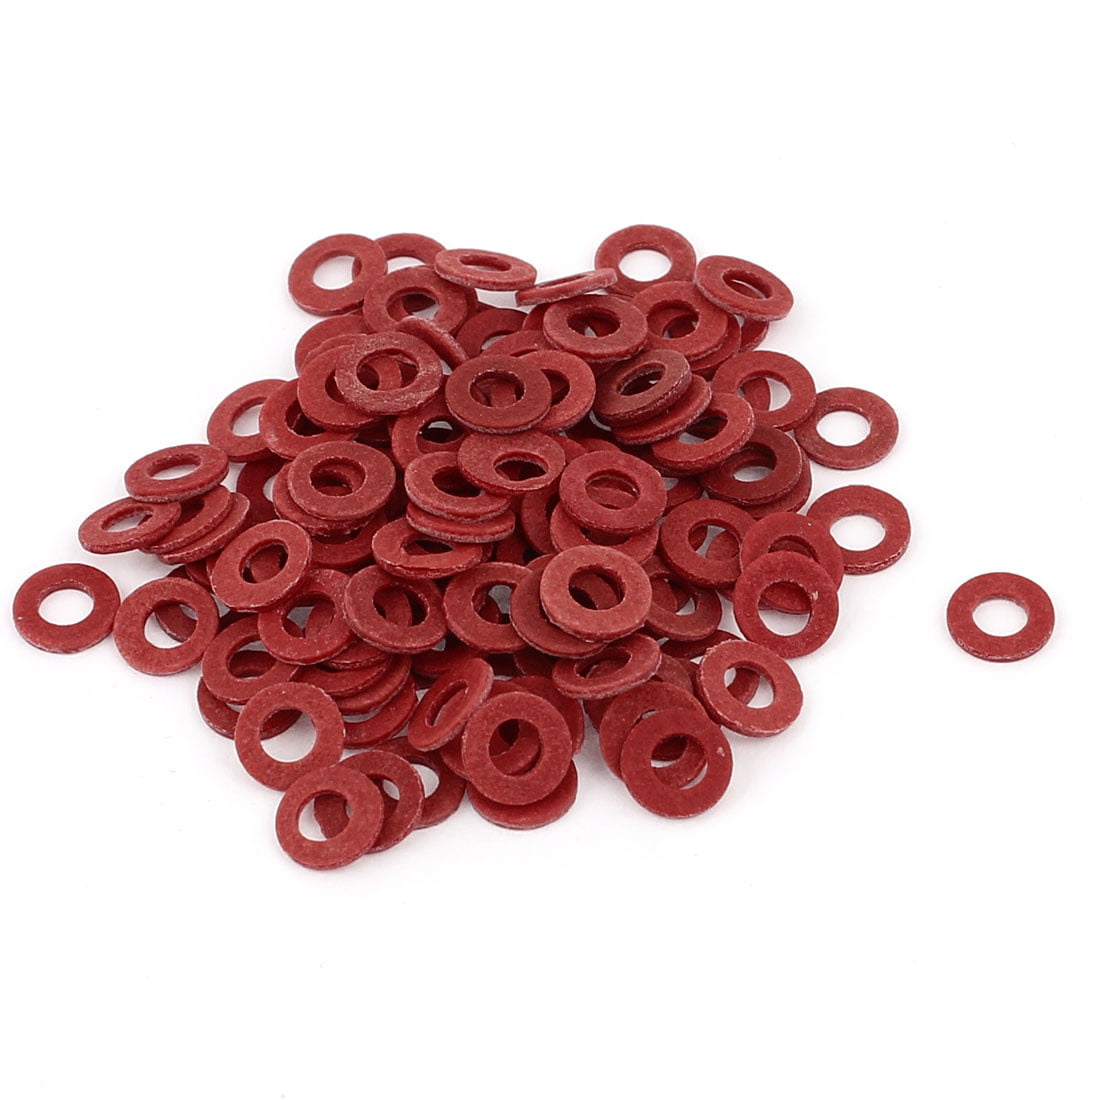 100pcs 3mm Red Motherboard Screw Insulating Fiber Washers 